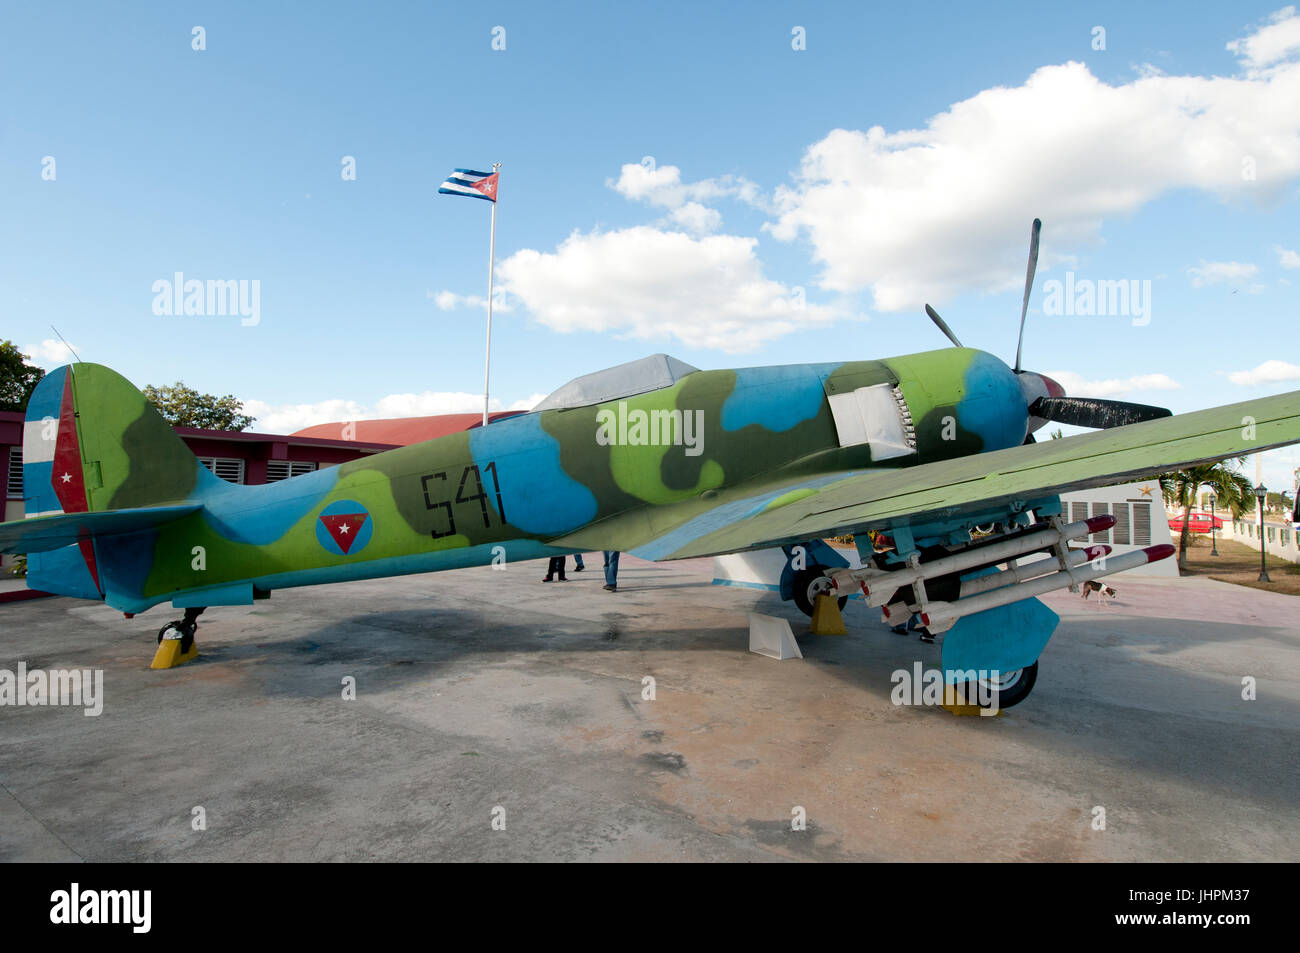 Hawker Sea Fury F-50 light attack bomber at the Bay of Pigs Museum (Museo de Playa Giron), Cuba (used in the Bay of Pigs invasion) Stock Photo